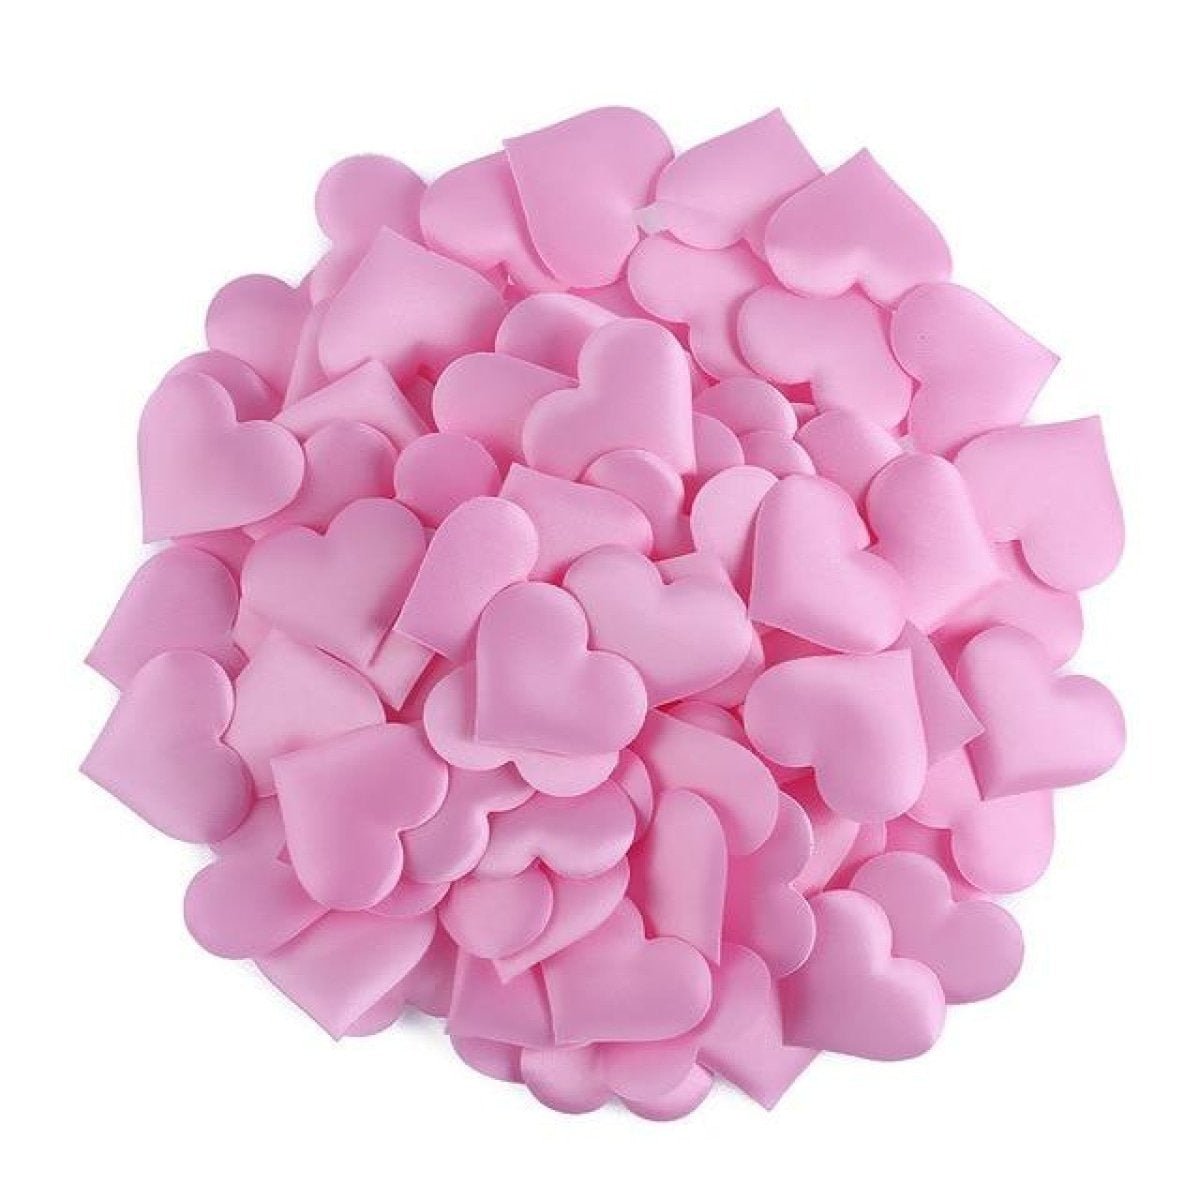 100pcs 2.0cm-3.5cm Fabric Love Heart Shape Petals For Wedding Table Decorations Confetti - Pink 2cm - - Asia Sell